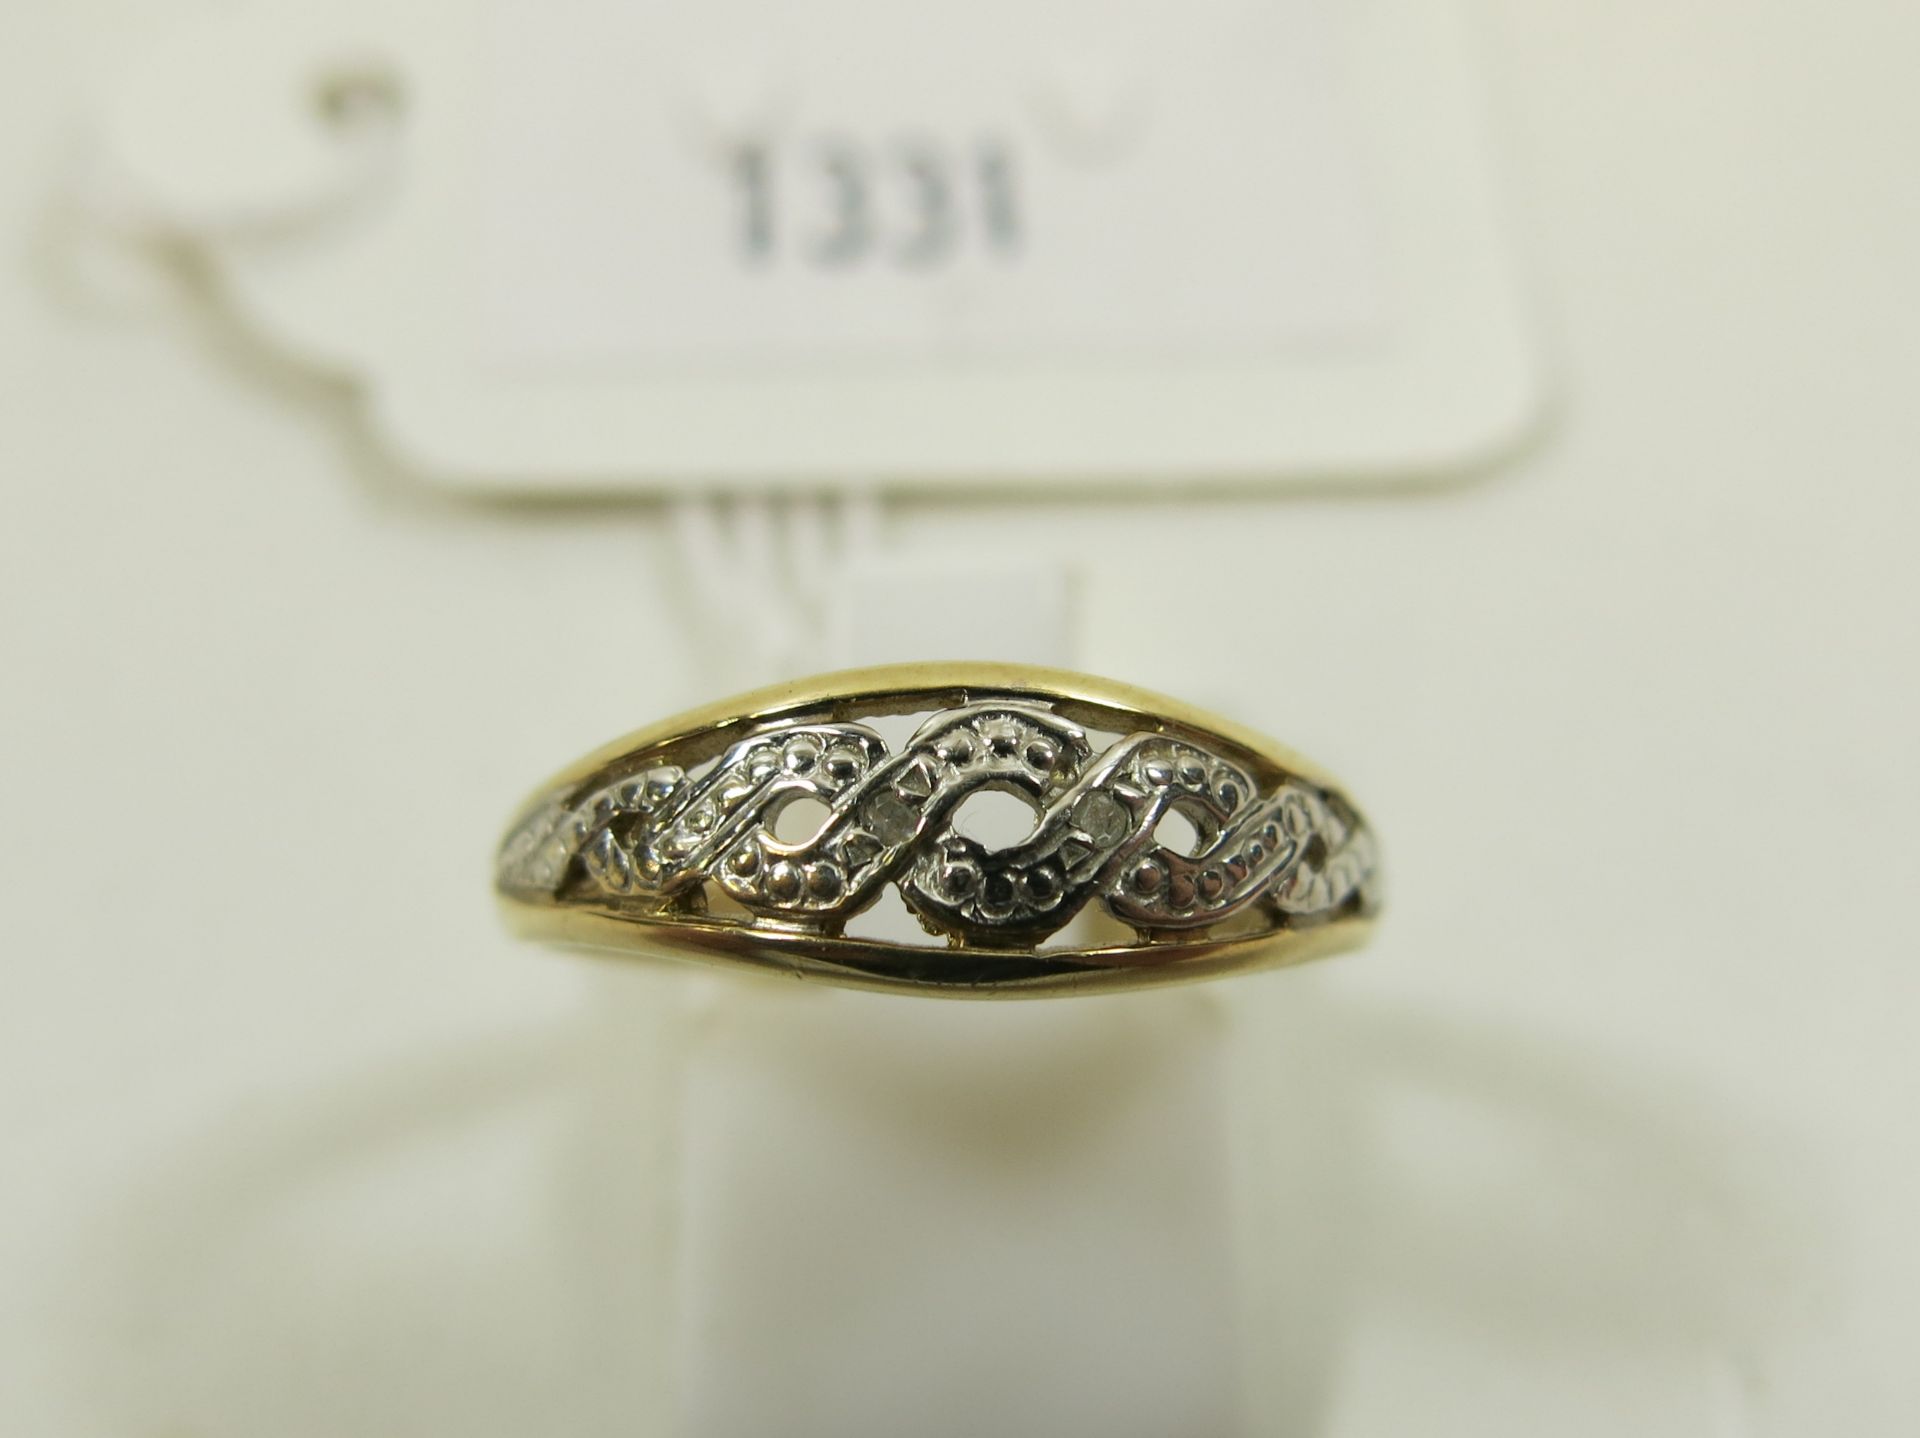 9ct Gold diamond and Marcasite Ring hallmarked Sheffield, marked 'DIA', size P, weight 2.9g (est £